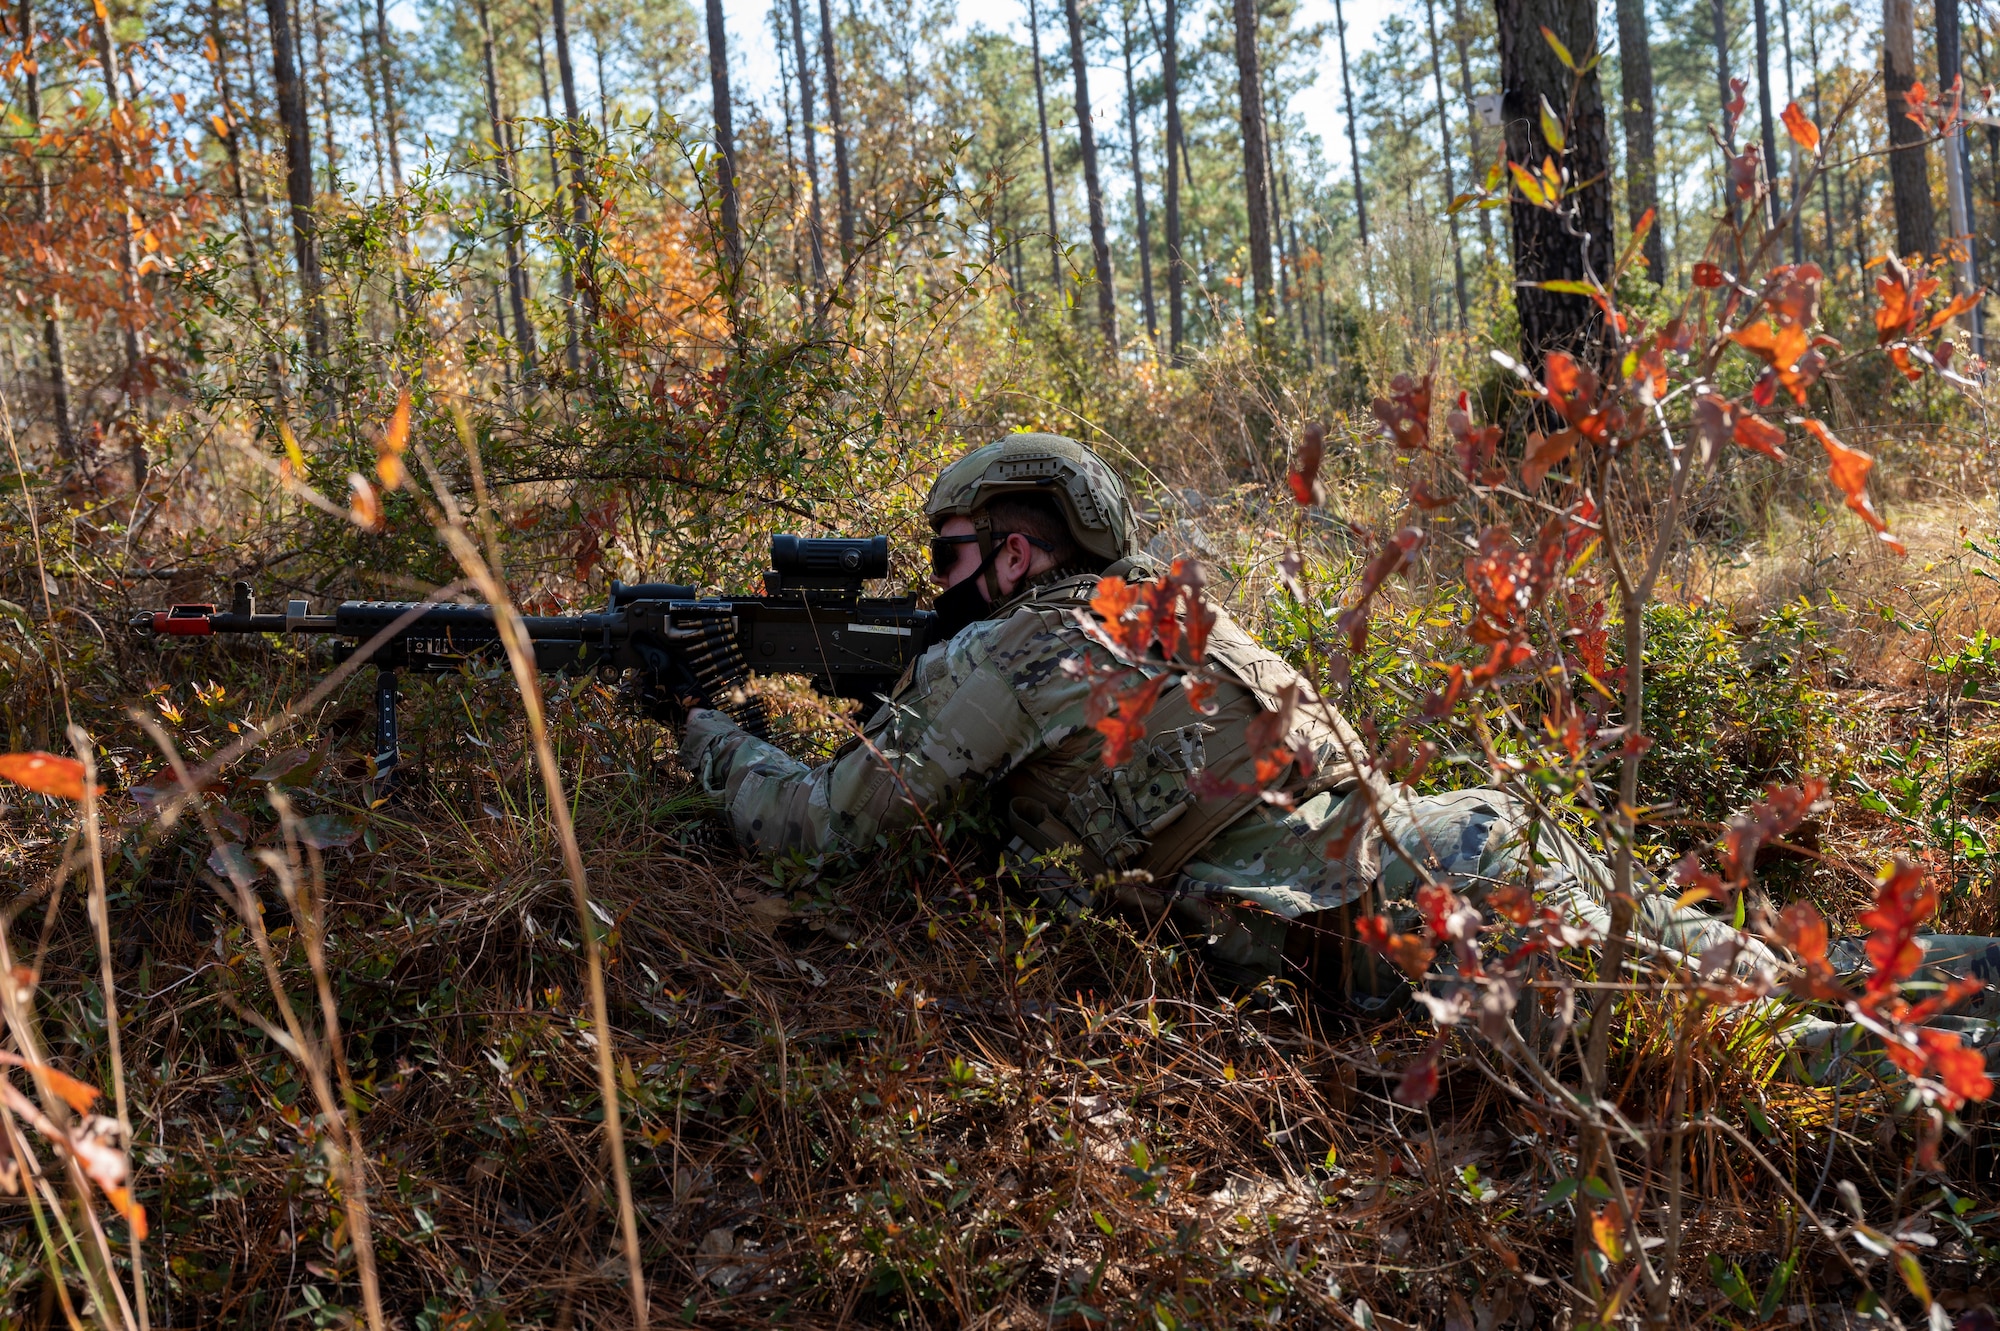 An Airman lays in some leaves during an exercise